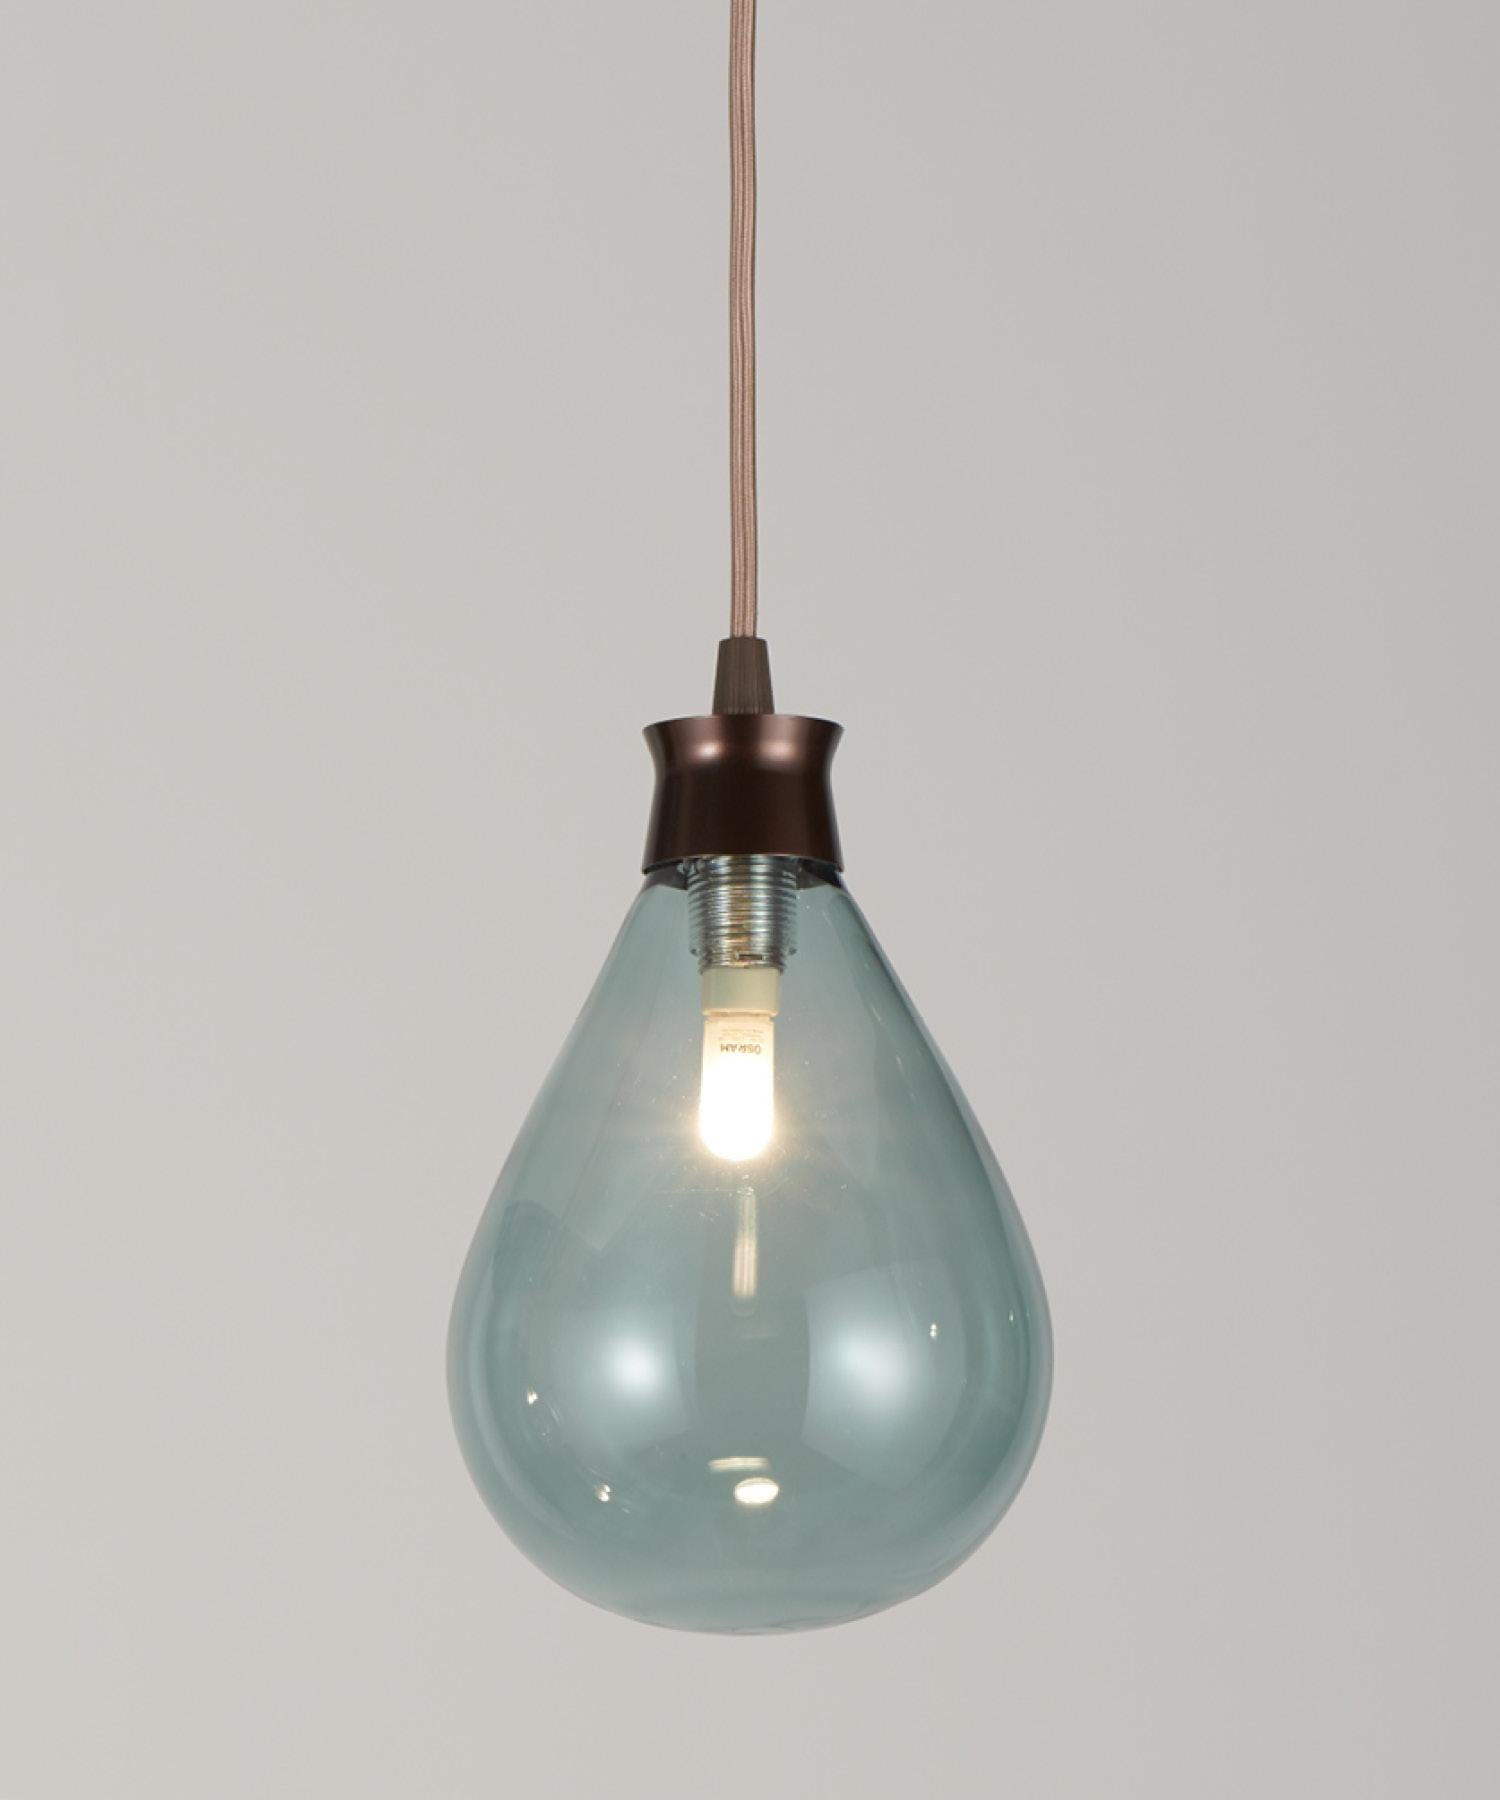 The Cintola Pendant works beautifully as a feature light for kitchens, bedrooms or living spaces. The hand-blown glass diffusers are available in a range of three colours to draw attention, whilst the anodised aluminium body keeps the overall